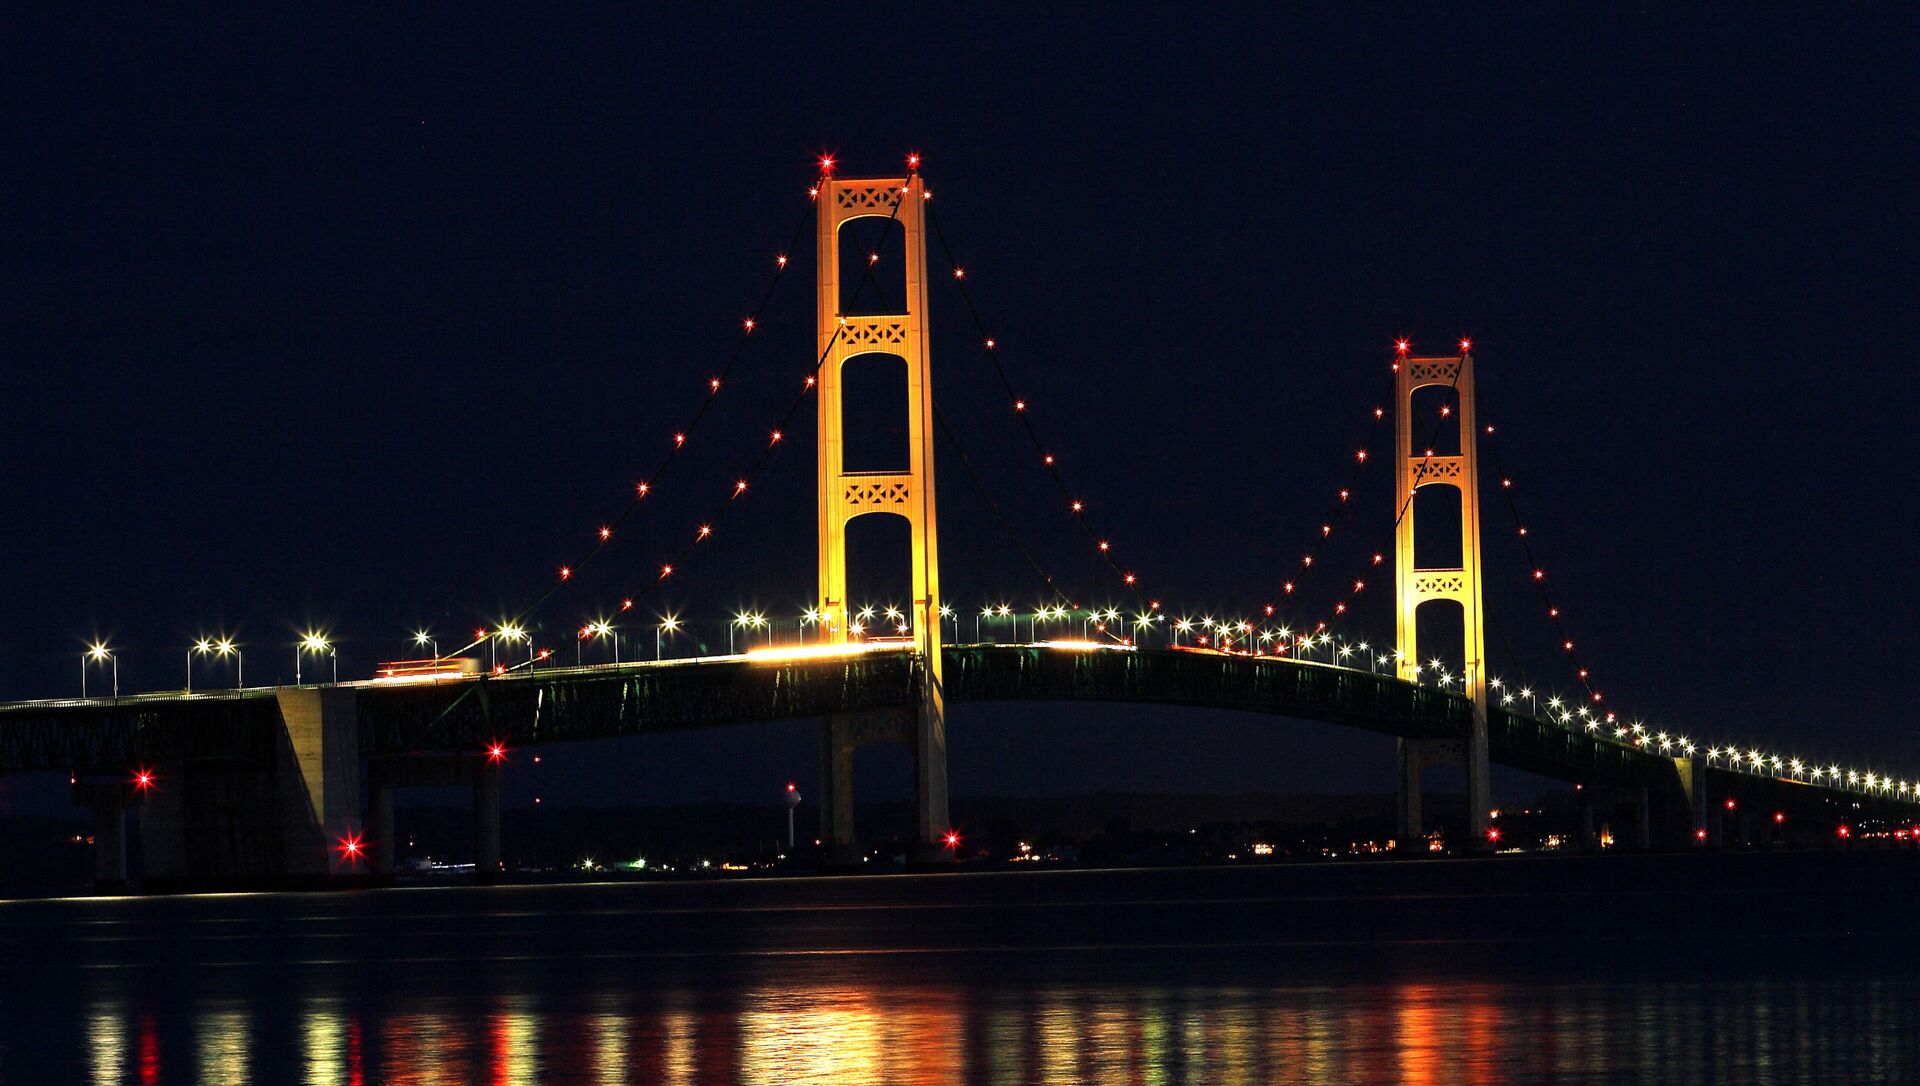 The Mackinaw Bridge July 27, 2008 as seen from St. Ignace, MI.The Mackinac Bridge straddles the Straits of Mackinac connecting Michigan's upper and lower peninsulas. Building it took three years, 2,500 men, 85,000 blueprints, 71,300 tons of structural steel, 466,3000 cubic yards of concrete, 41,000 miles of cable wire and millions of steel rivets and bolts. - Sputnik International, 1920, 18.07.2021